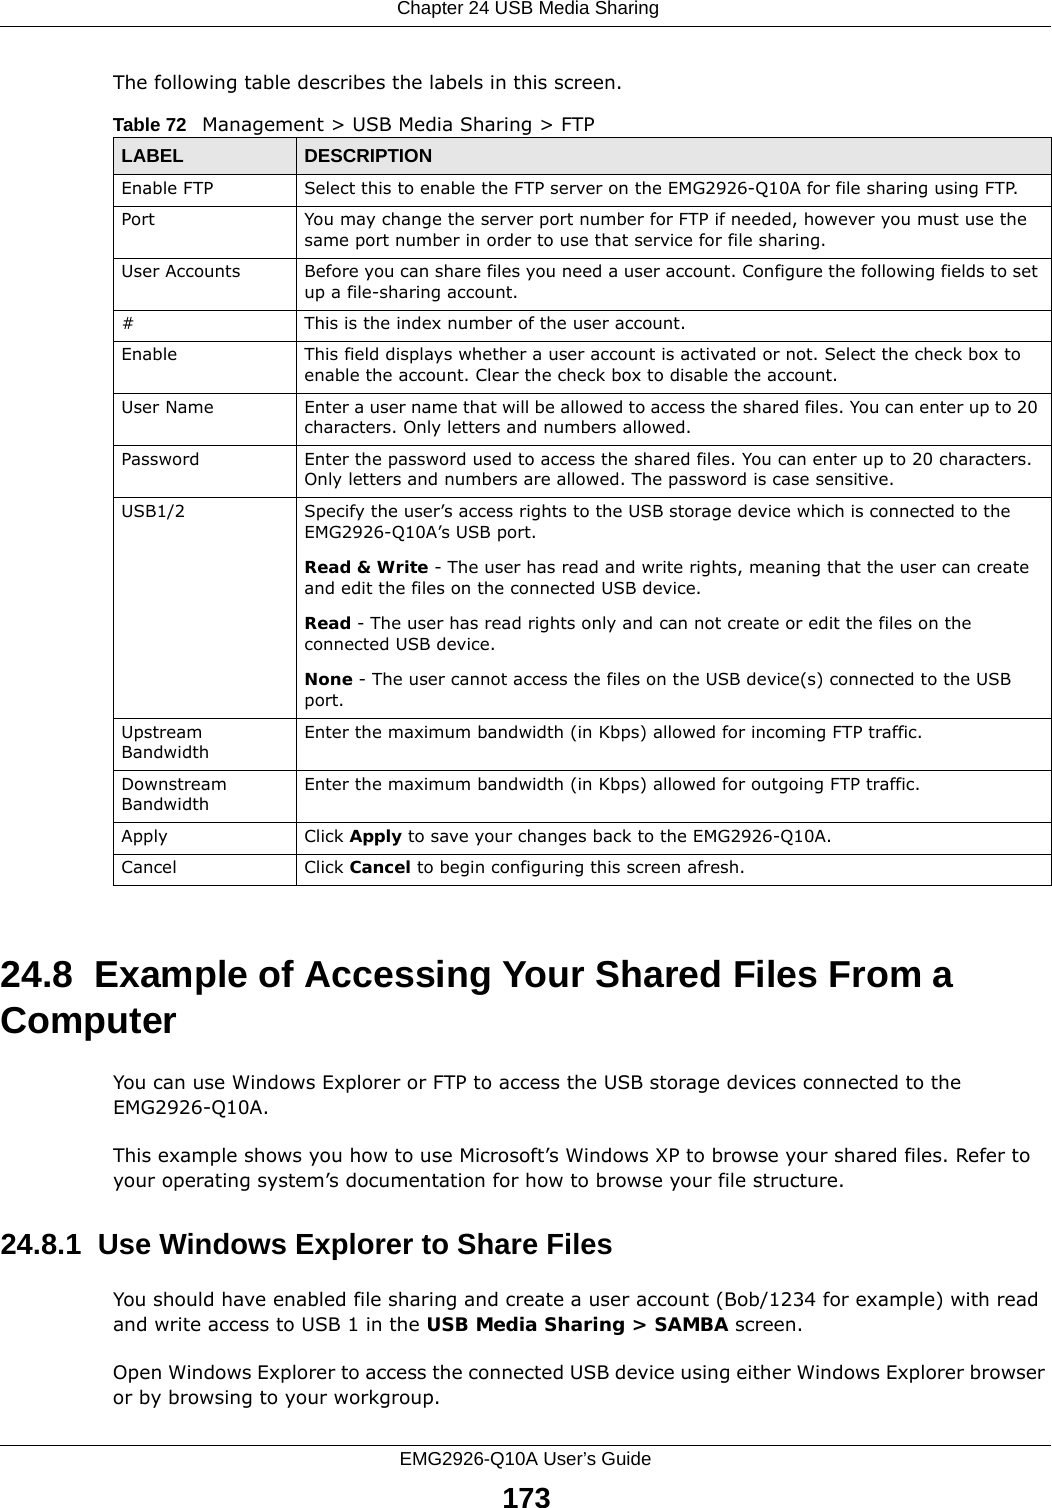  Chapter 24 USB Media SharingEMG2926-Q10A User’s Guide173The following table describes the labels in this screen.24.8  Example of Accessing Your Shared Files From a Computer You can use Windows Explorer or FTP to access the USB storage devices connected to the EMG2926-Q10A.This example shows you how to use Microsoft’s Windows XP to browse your shared files. Refer to your operating system’s documentation for how to browse your file structure. 24.8.1  Use Windows Explorer to Share Files You should have enabled file sharing and create a user account (Bob/1234 for example) with read and write access to USB 1 in the USB Media Sharing &gt; SAMBA screen.Open Windows Explorer to access the connected USB device using either Windows Explorer browser or by browsing to your workgroup.Table 72   Management &gt; USB Media Sharing &gt; FTPLABEL DESCRIPTIONEnable FTP Select this to enable the FTP server on the EMG2926-Q10A for file sharing using FTP.Port You may change the server port number for FTP if needed, however you must use the same port number in order to use that service for file sharing.User Accounts Before you can share files you need a user account. Configure the following fields to set up a file-sharing account. #This is the index number of the user account.Enable This field displays whether a user account is activated or not. Select the check box to enable the account. Clear the check box to disable the account.User Name Enter a user name that will be allowed to access the shared files. You can enter up to 20 characters. Only letters and numbers allowed.Password Enter the password used to access the shared files. You can enter up to 20 characters. Only letters and numbers are allowed. The password is case sensitive.USB1/2 Specify the user’s access rights to the USB storage device which is connected to the EMG2926-Q10A’s USB port.Read &amp; Write - The user has read and write rights, meaning that the user can create and edit the files on the connected USB device.Read - The user has read rights only and can not create or edit the files on the connected USB device.None - The user cannot access the files on the USB device(s) connected to the USB port.Upstream BandwidthEnter the maximum bandwidth (in Kbps) allowed for incoming FTP traffic.Downstream BandwidthEnter the maximum bandwidth (in Kbps) allowed for outgoing FTP traffic.Apply Click Apply to save your changes back to the EMG2926-Q10A.Cancel Click Cancel to begin configuring this screen afresh.